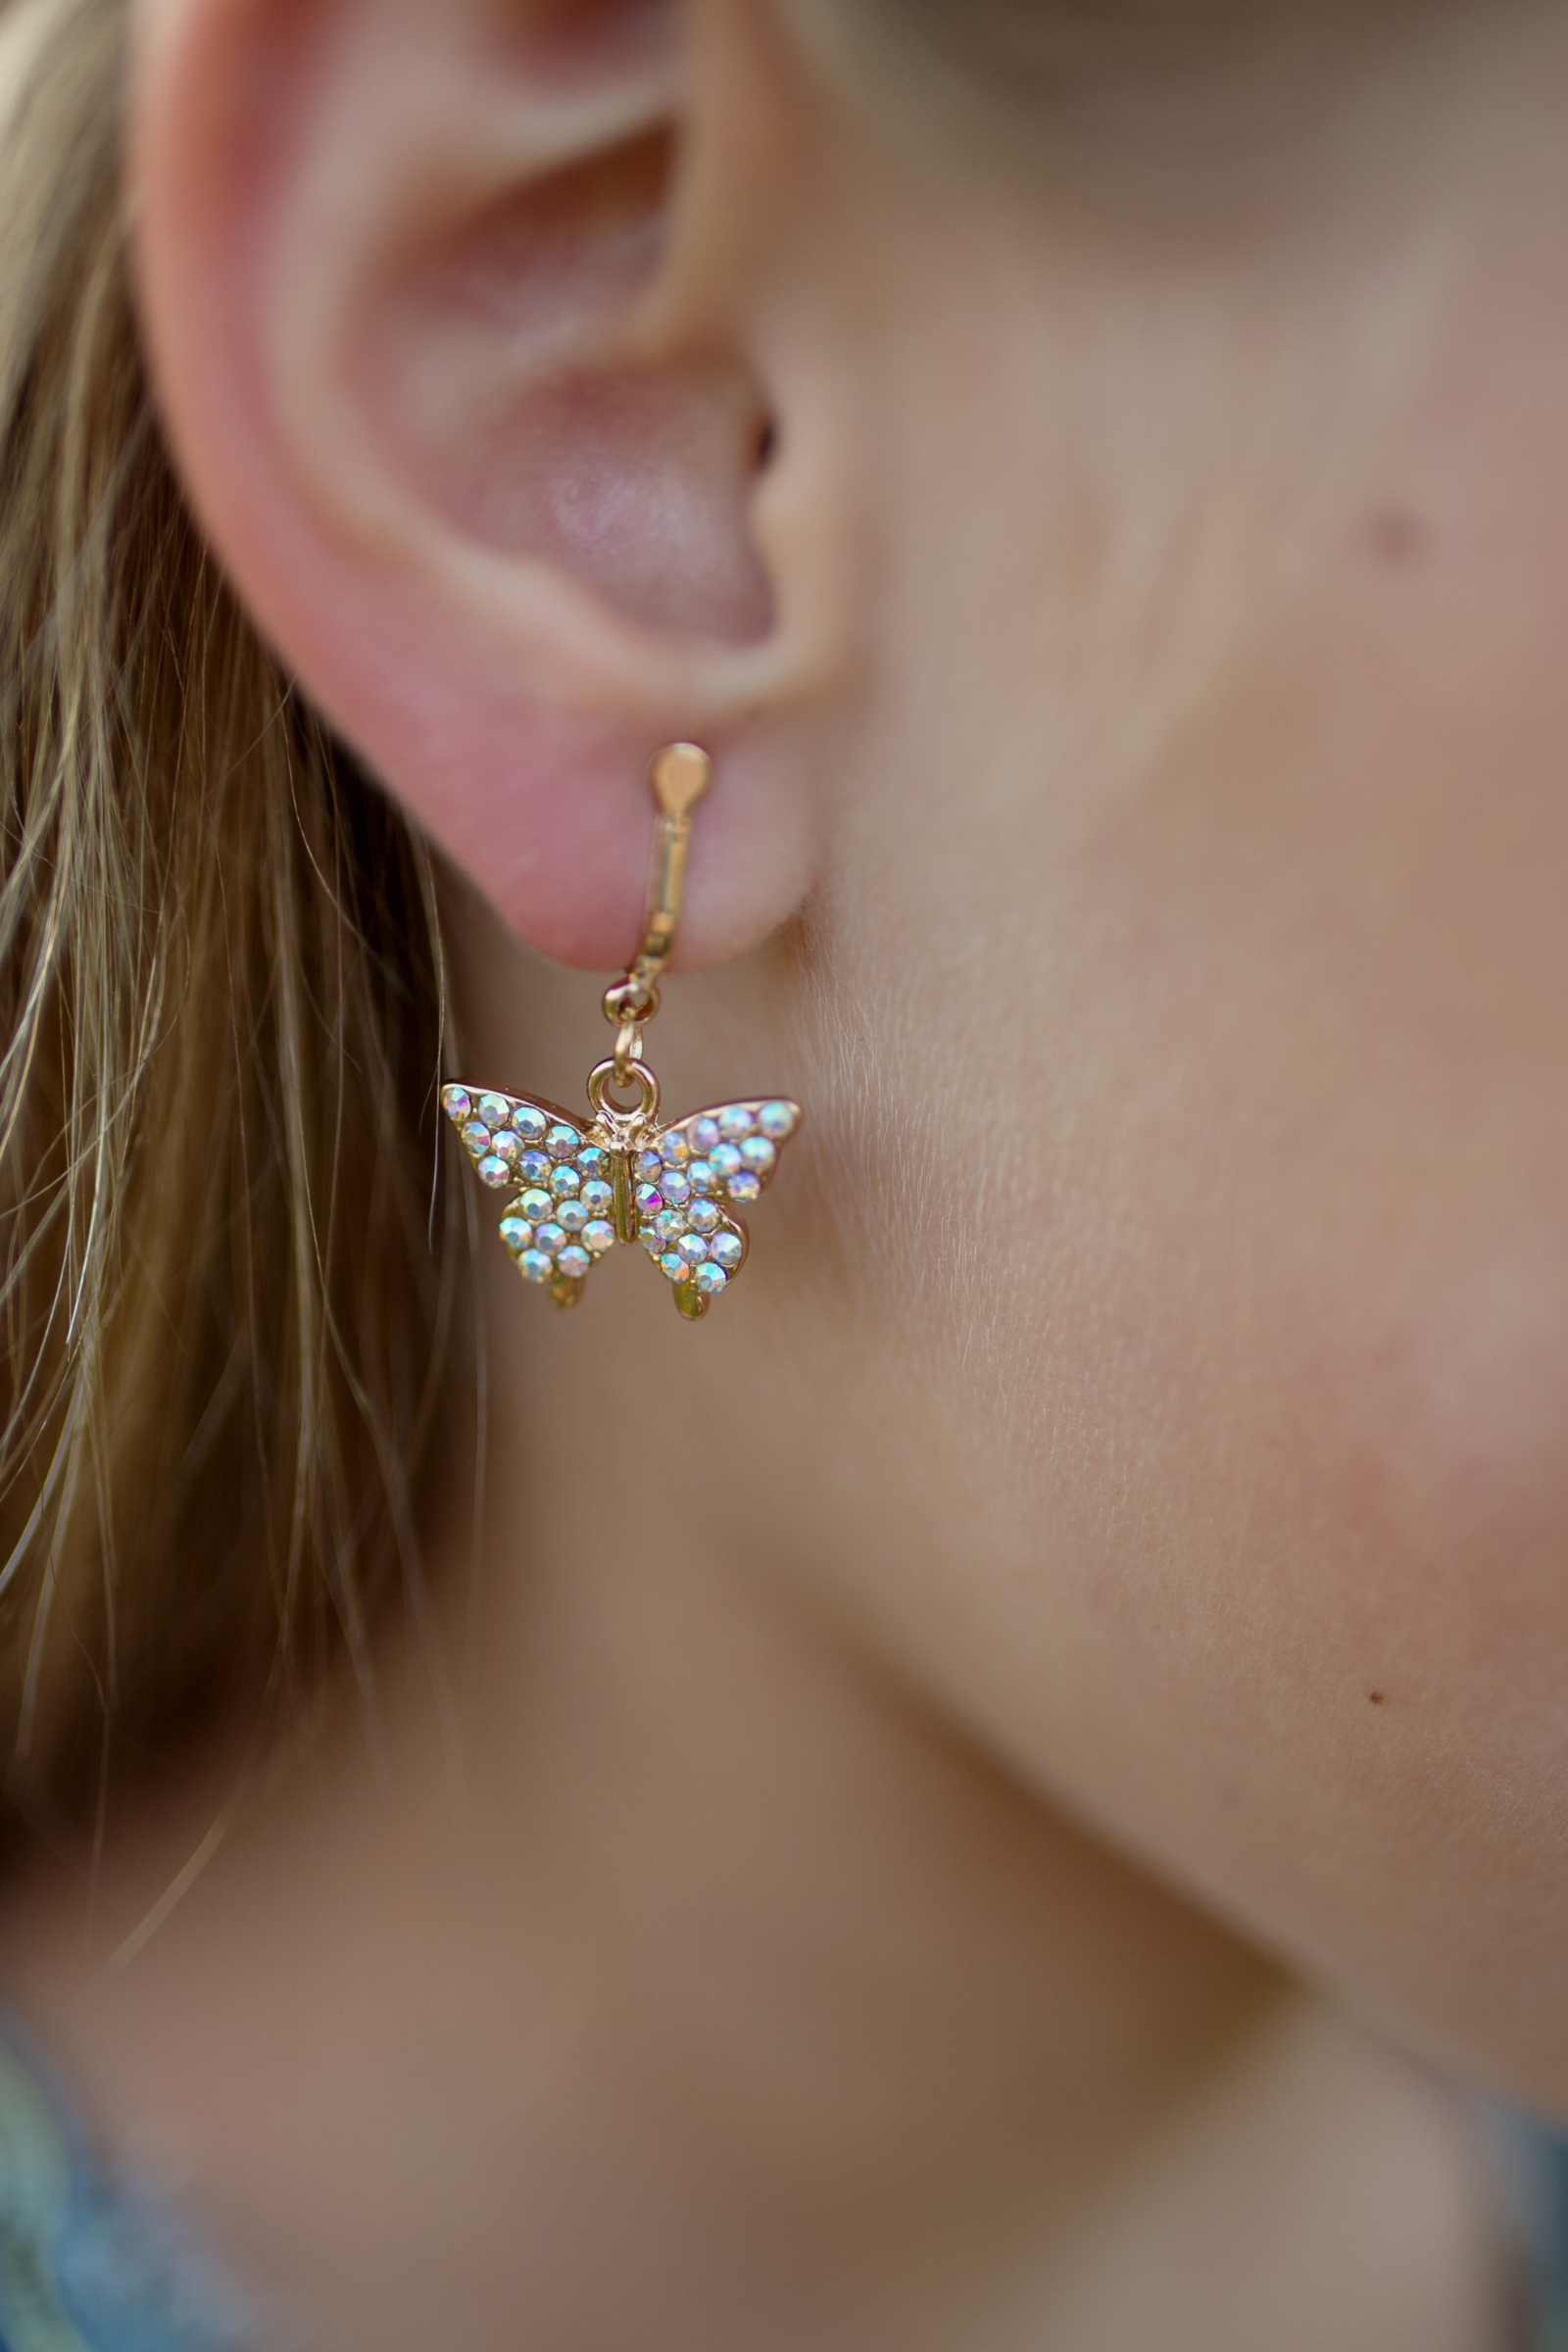 Earrings gold butterflies with pearls and rhinestones wings ear decoration  new